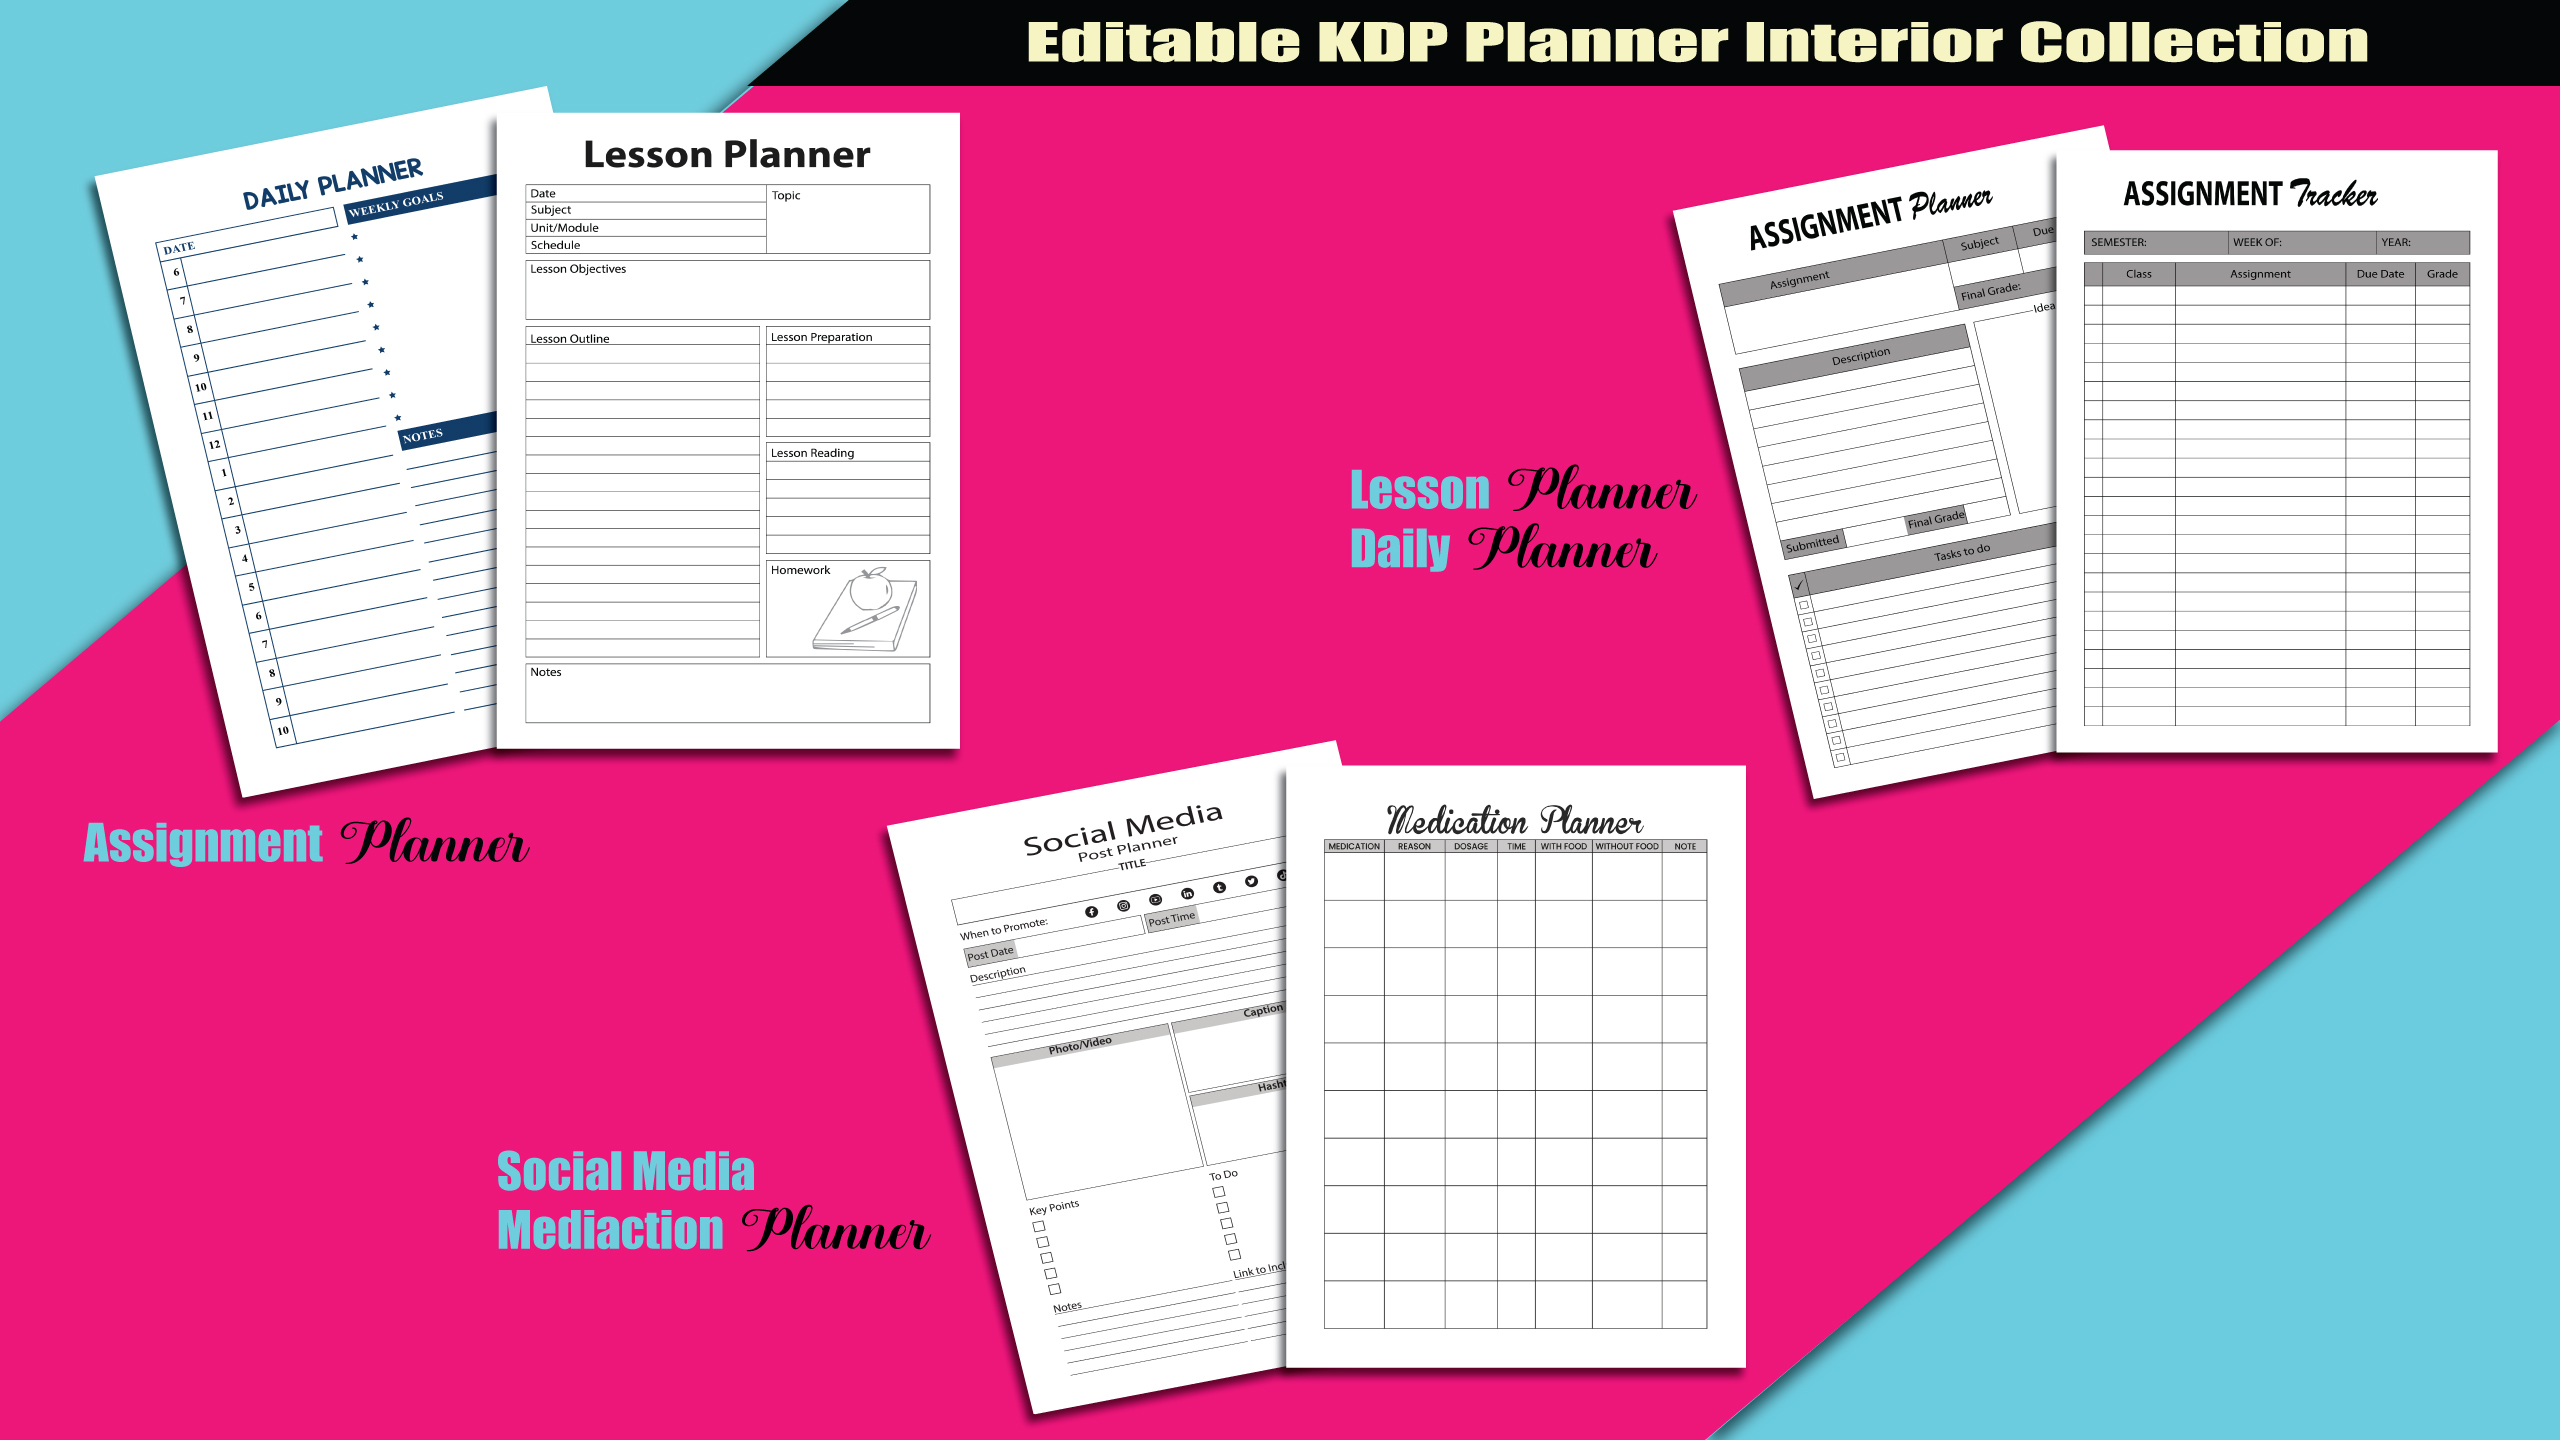 Editable KDP Planner Interior Collection facebook image.